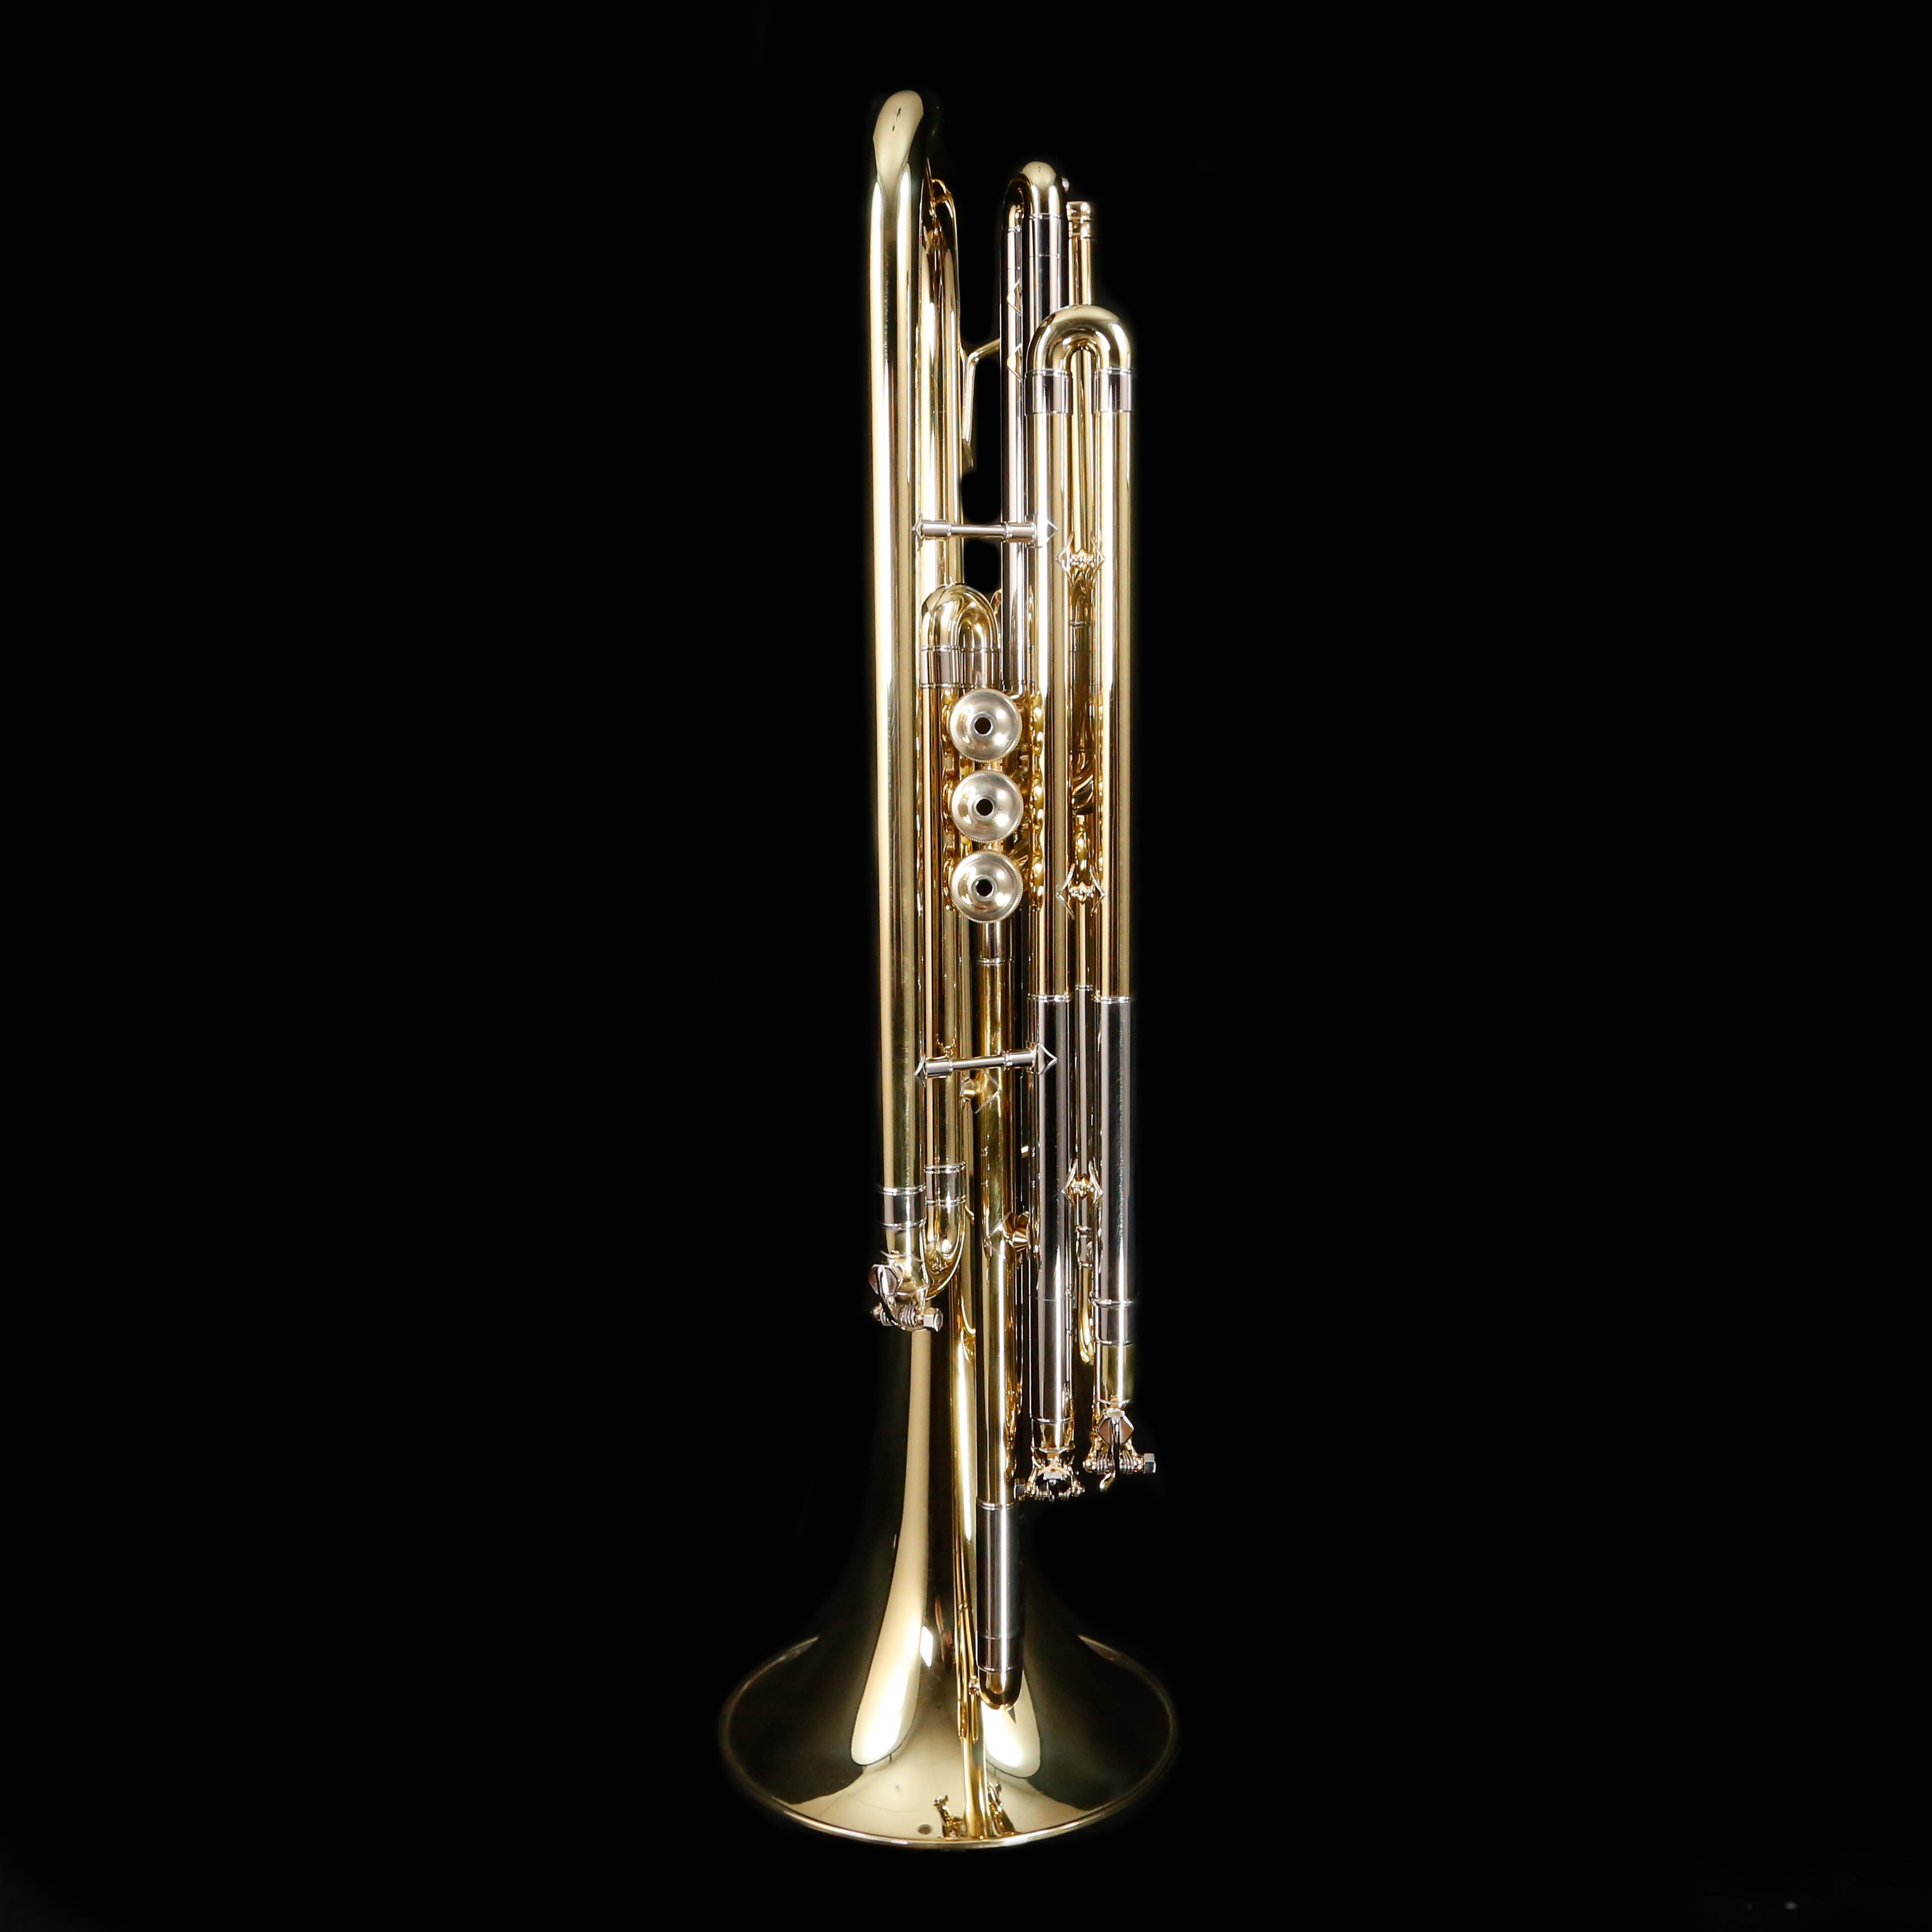 Bach B188 Harmony & Specialty Trumpet - Professional